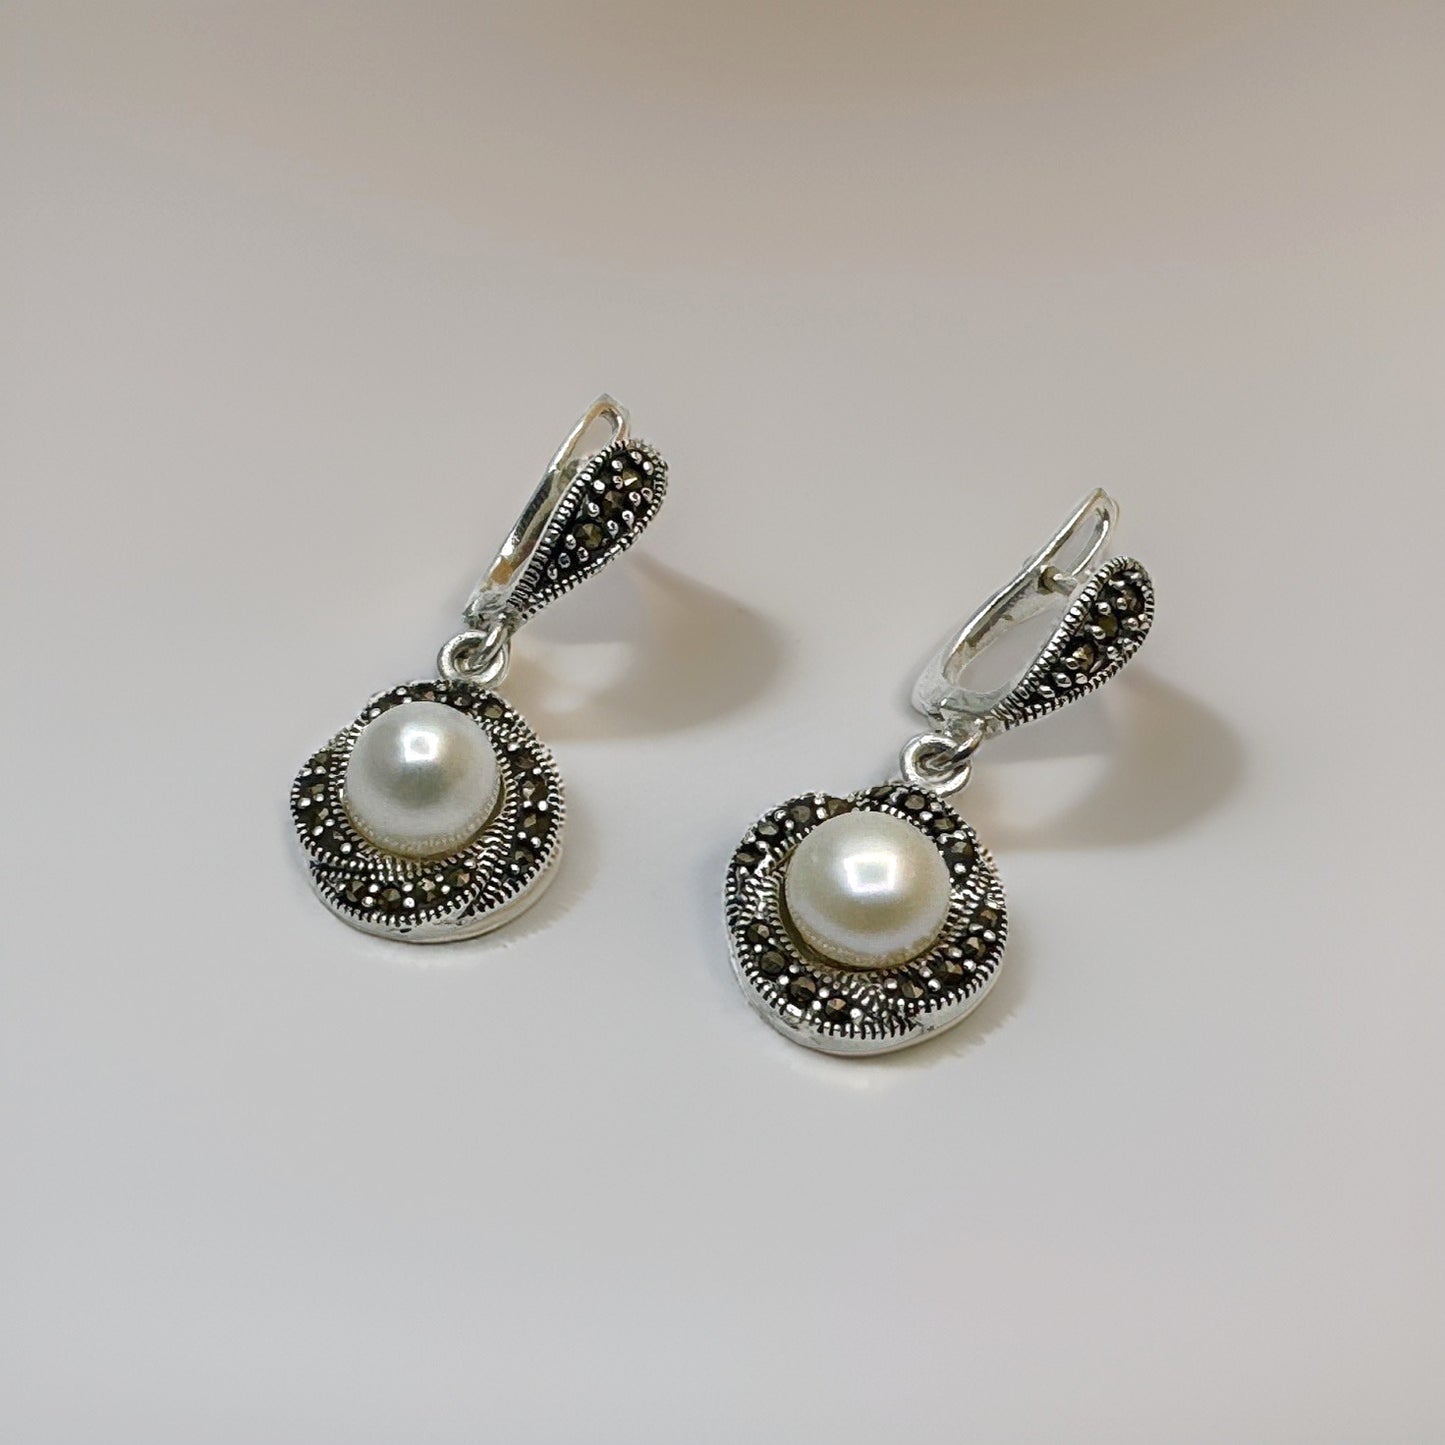 Pearly Dream Freshwater Pearl Necklace and Earring Set